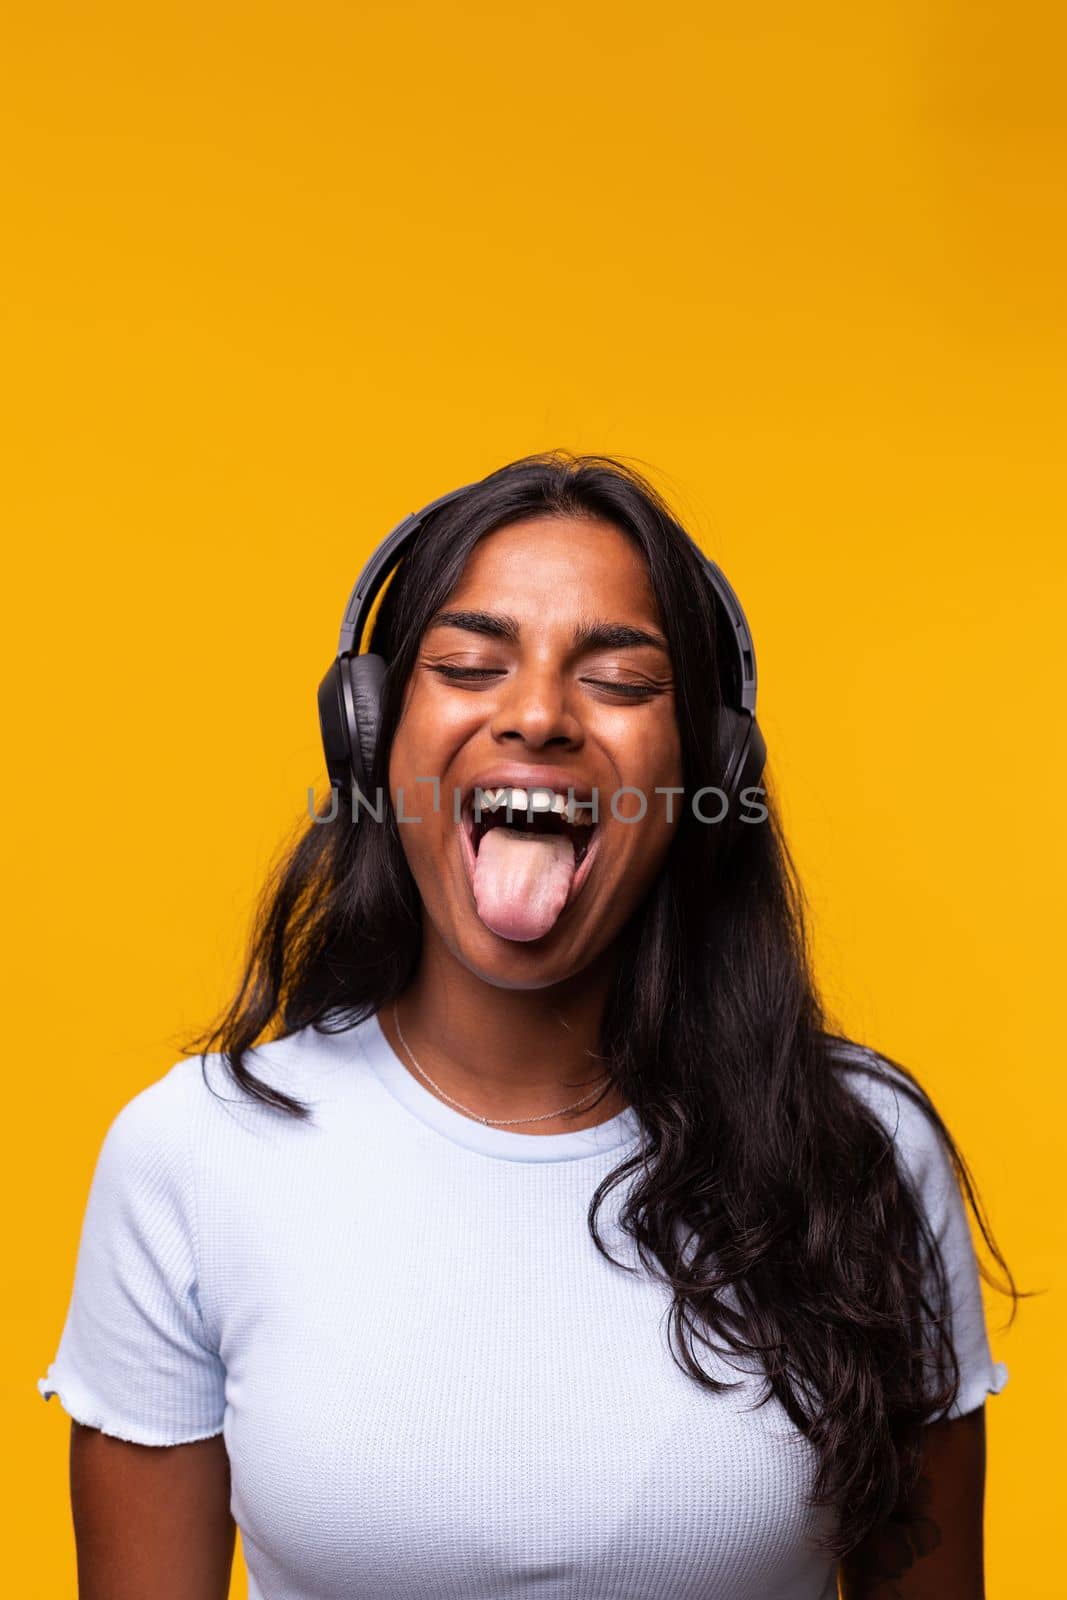 Vertical portrait of happy young Indian woman wearing wireless headphones showing tongue to camera. Isolated on yellow background. Studio shot. Lifestyle concept.